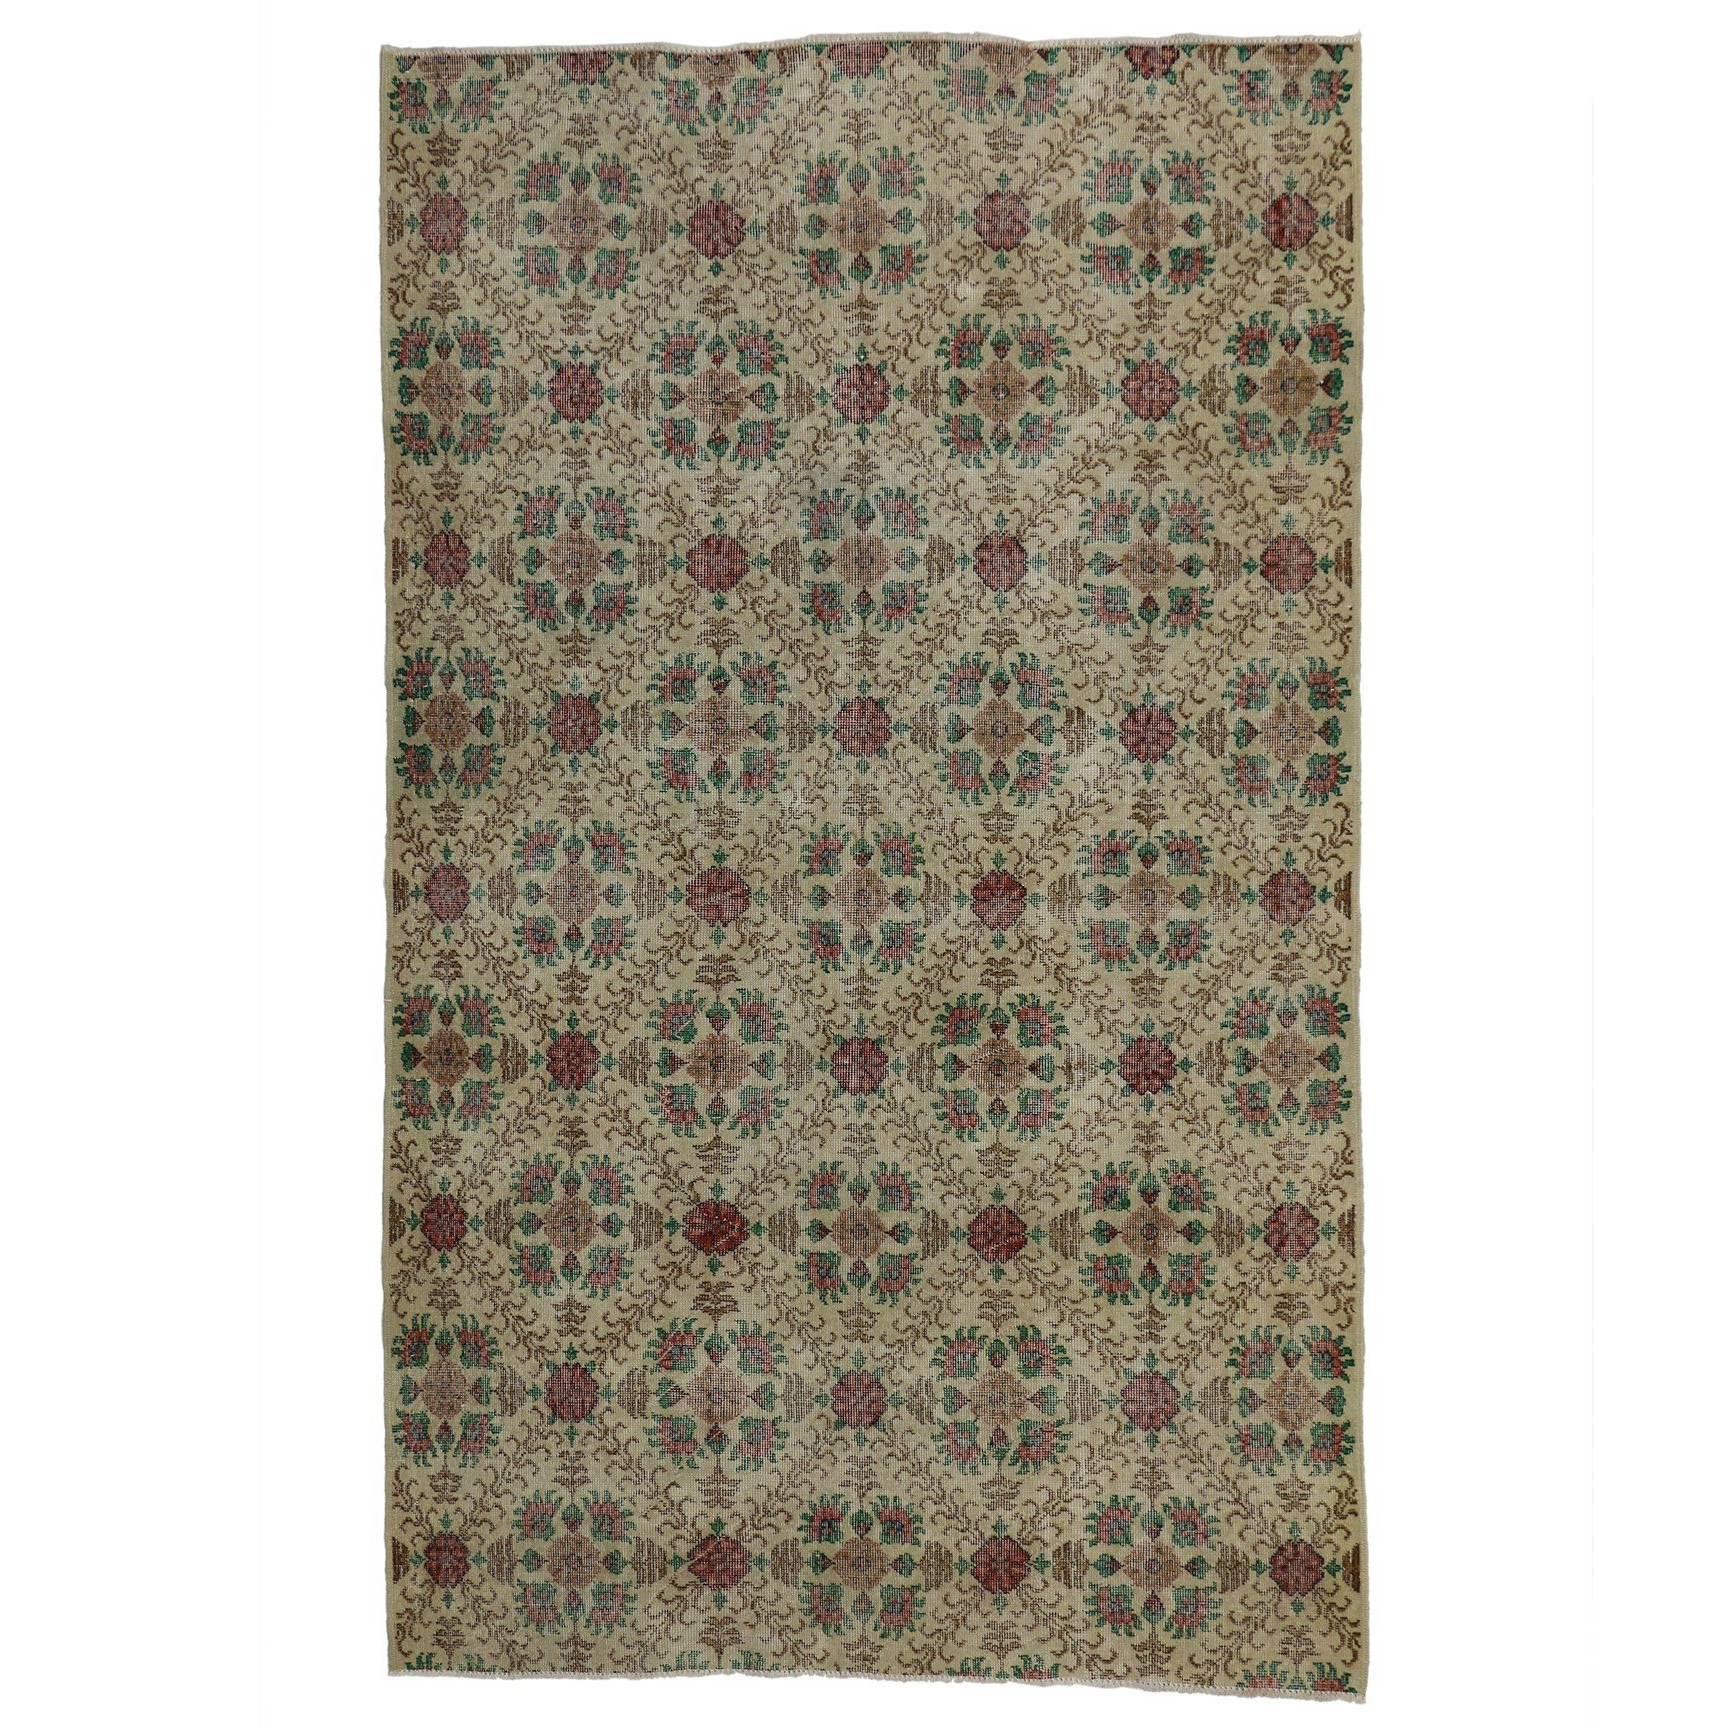 Distressed Turkish Sivas Rug with Shabby Chic English Country Cottage Style For Sale